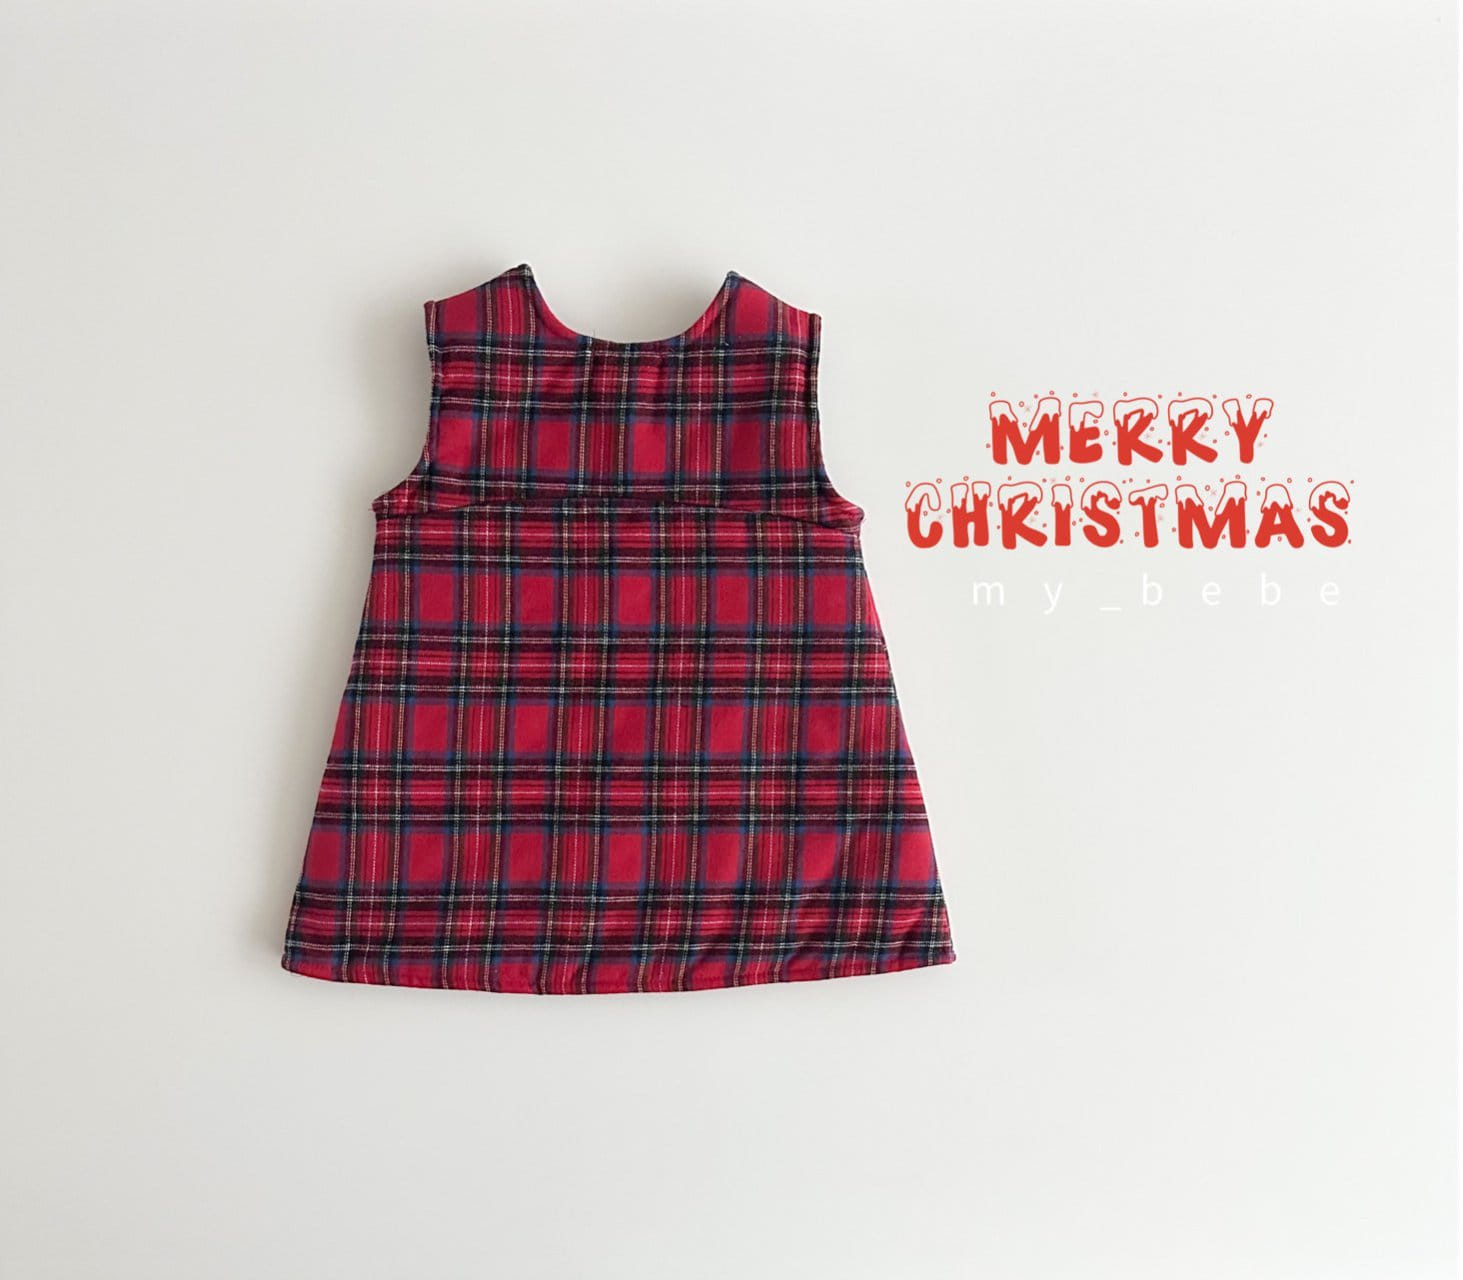 My Bebe - Korean Baby Fashion - #babyoutfit - The End Of Year One-Piece - 7